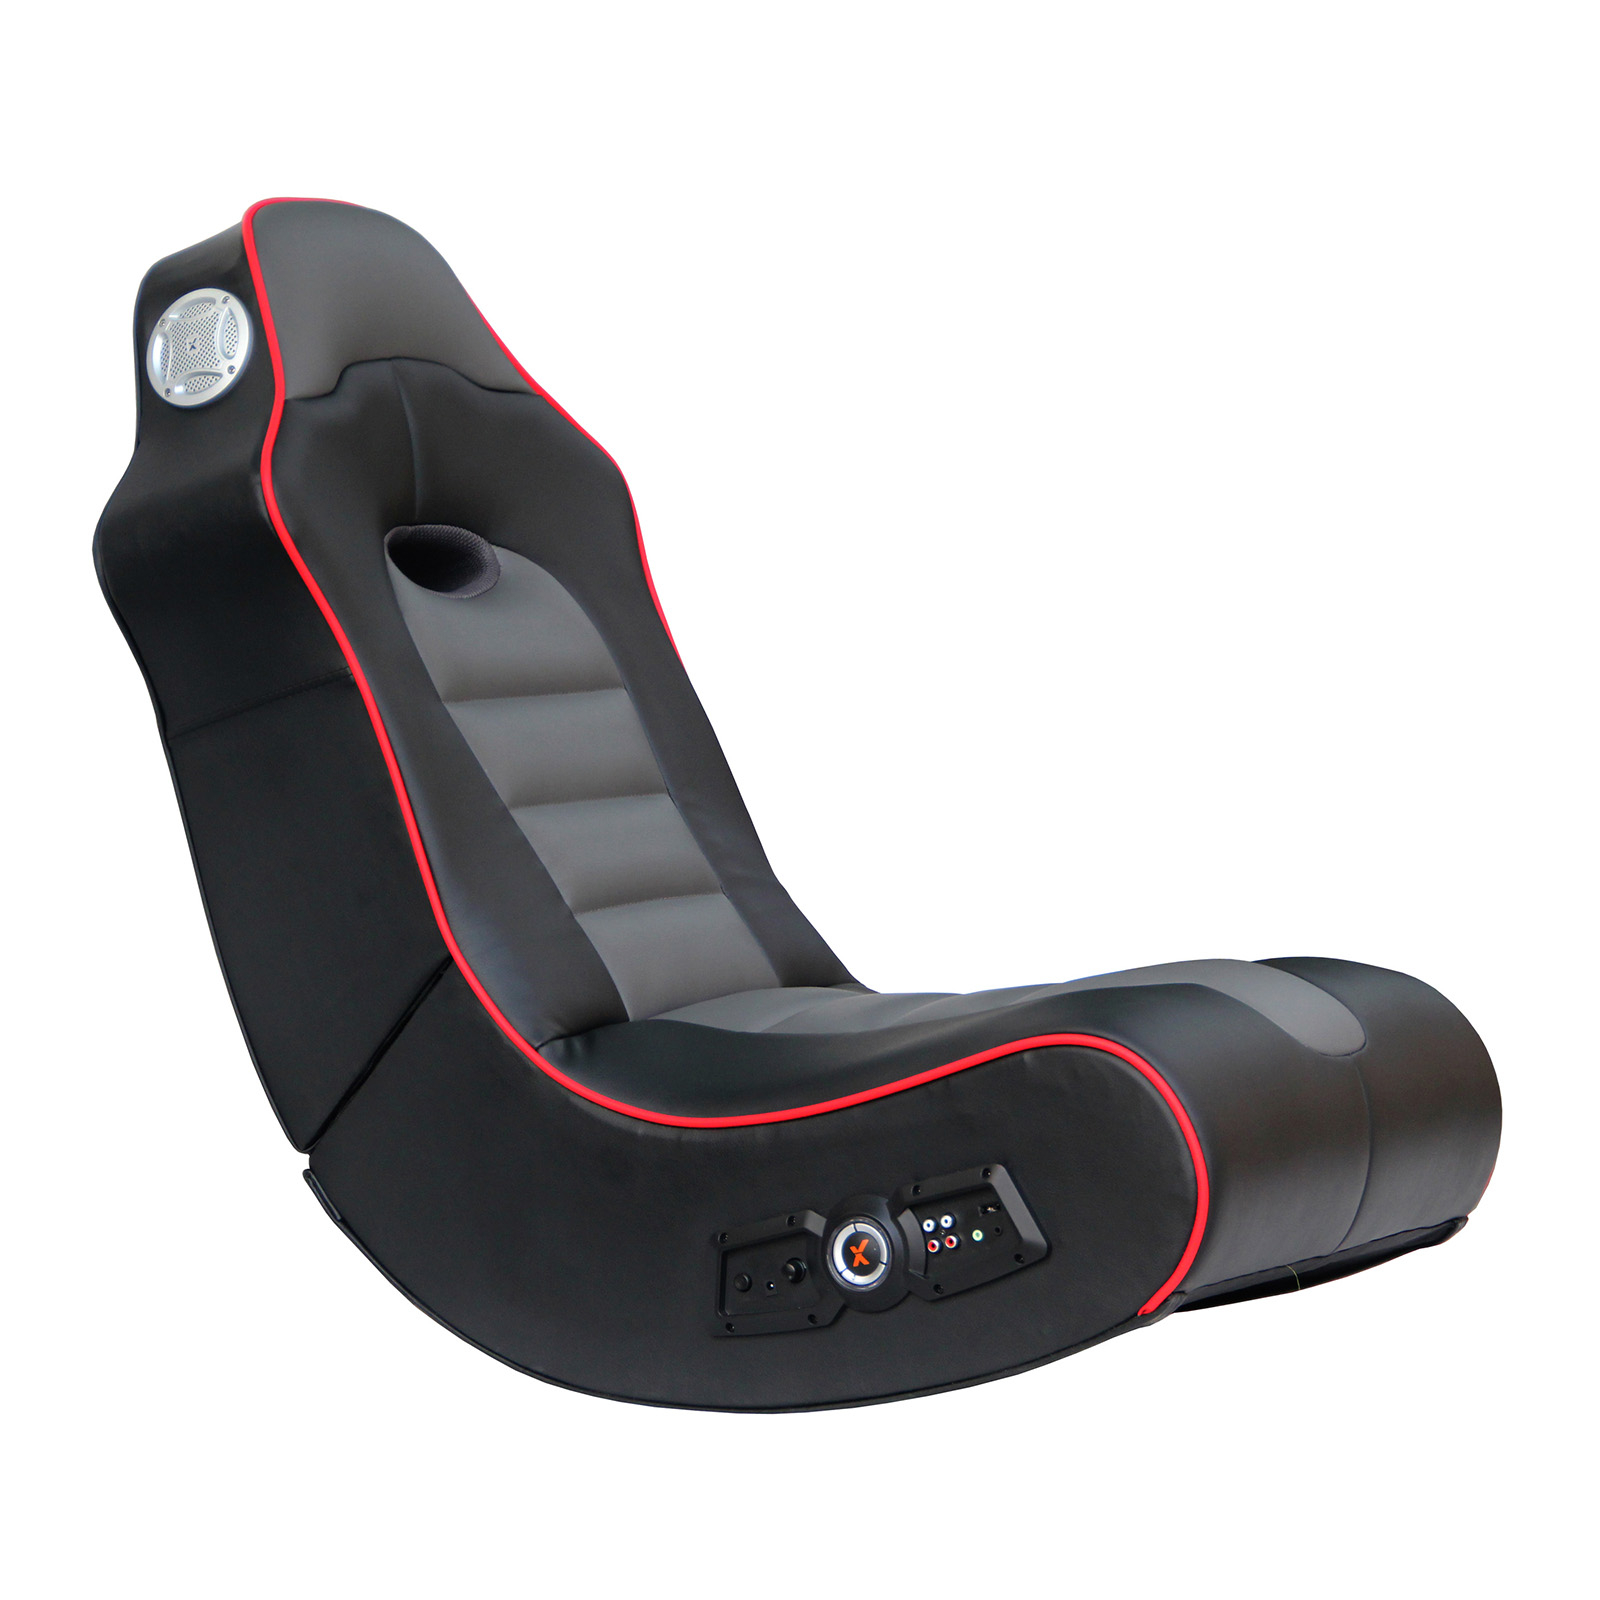 X Rocker 5172601 Surge Bluetooth 2.1 Sound Gaming Chair, Black with Red Piping